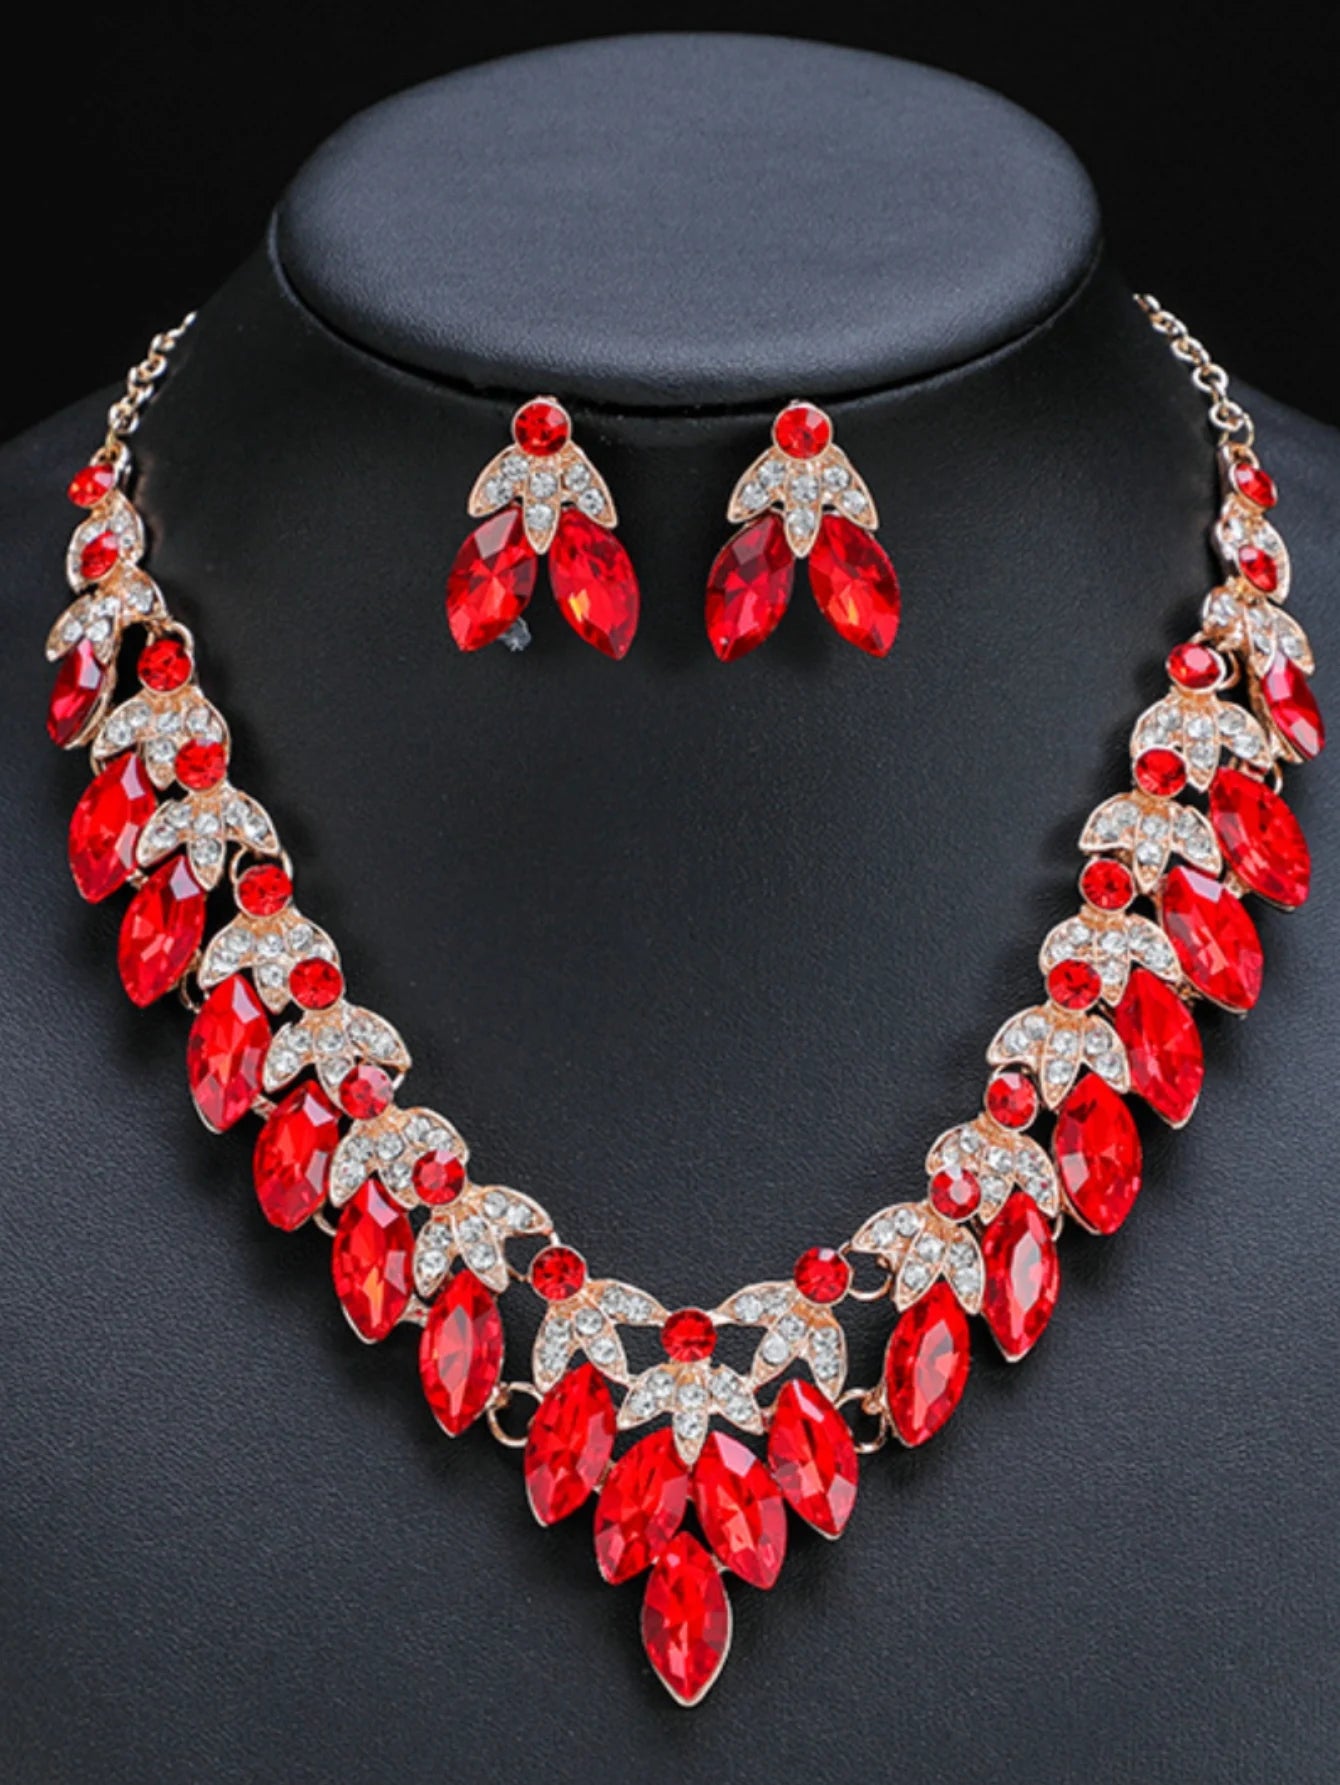 3 pcs jewelry set with crystal women's necklace and earrings for decoration, suitable for women to attend parties - Hiron Store